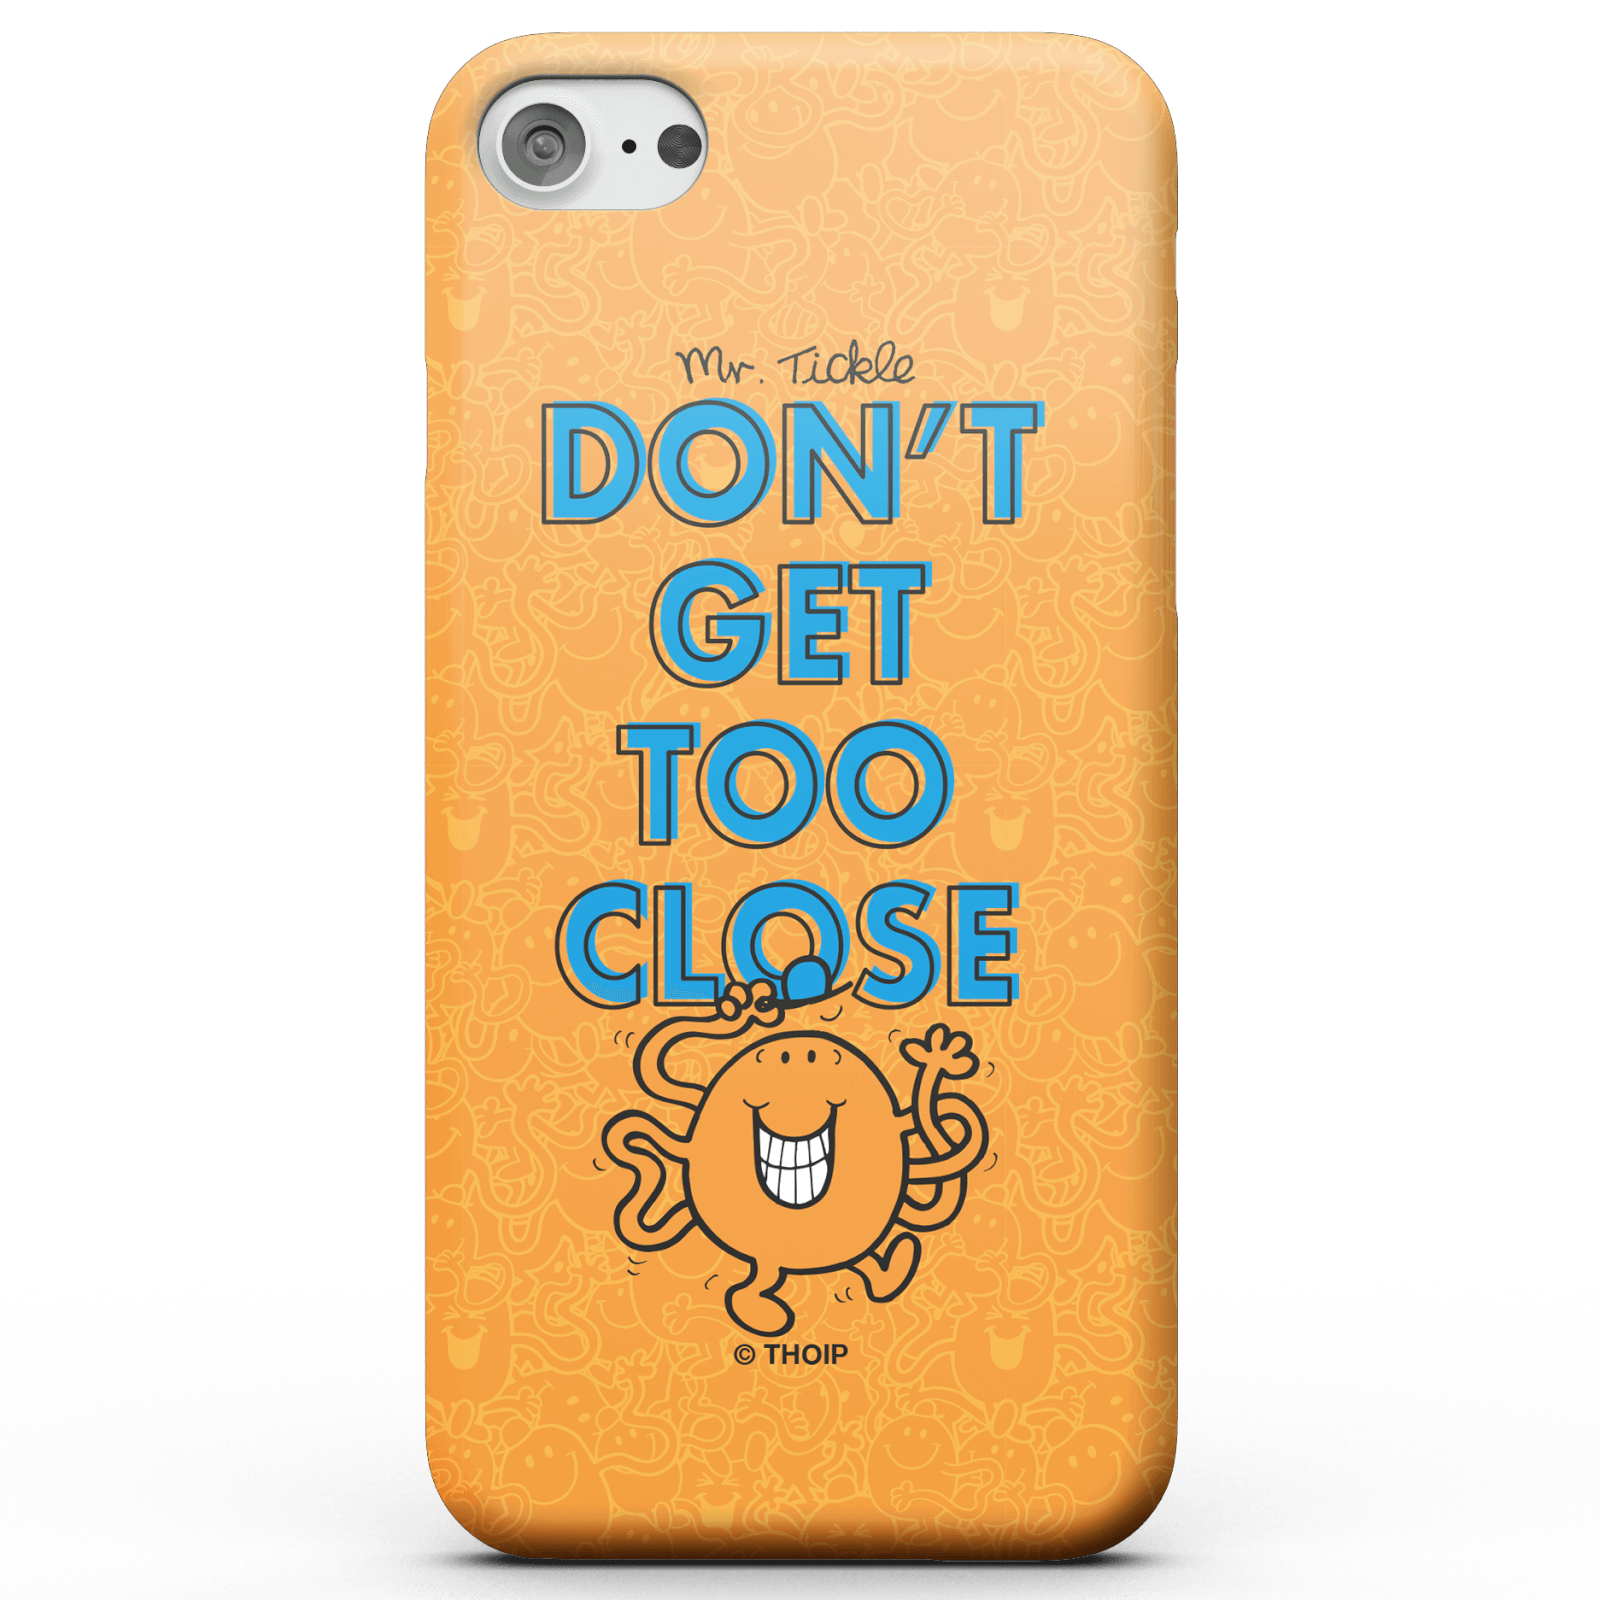 Mr Men & Little Miss Mr. Tickle Don't Get Too Close Phone Case for iPhone and Android - iPhone 5/5s - Snap Case - Matte